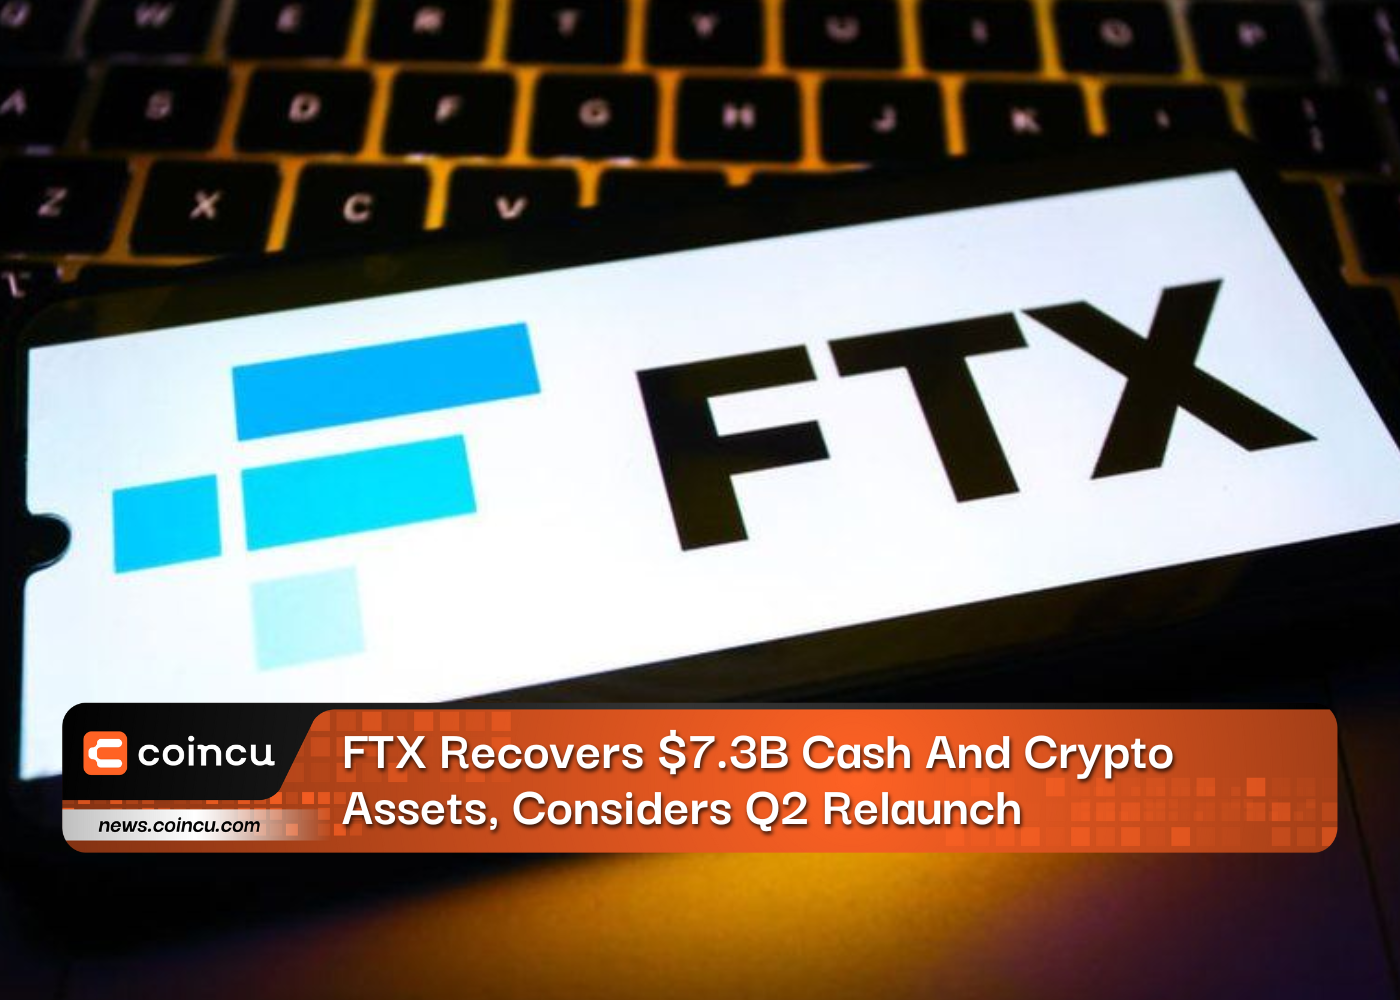 FTX Recovers $7.3B Cash And Crypto Assets, Considers Q2 Relaunch